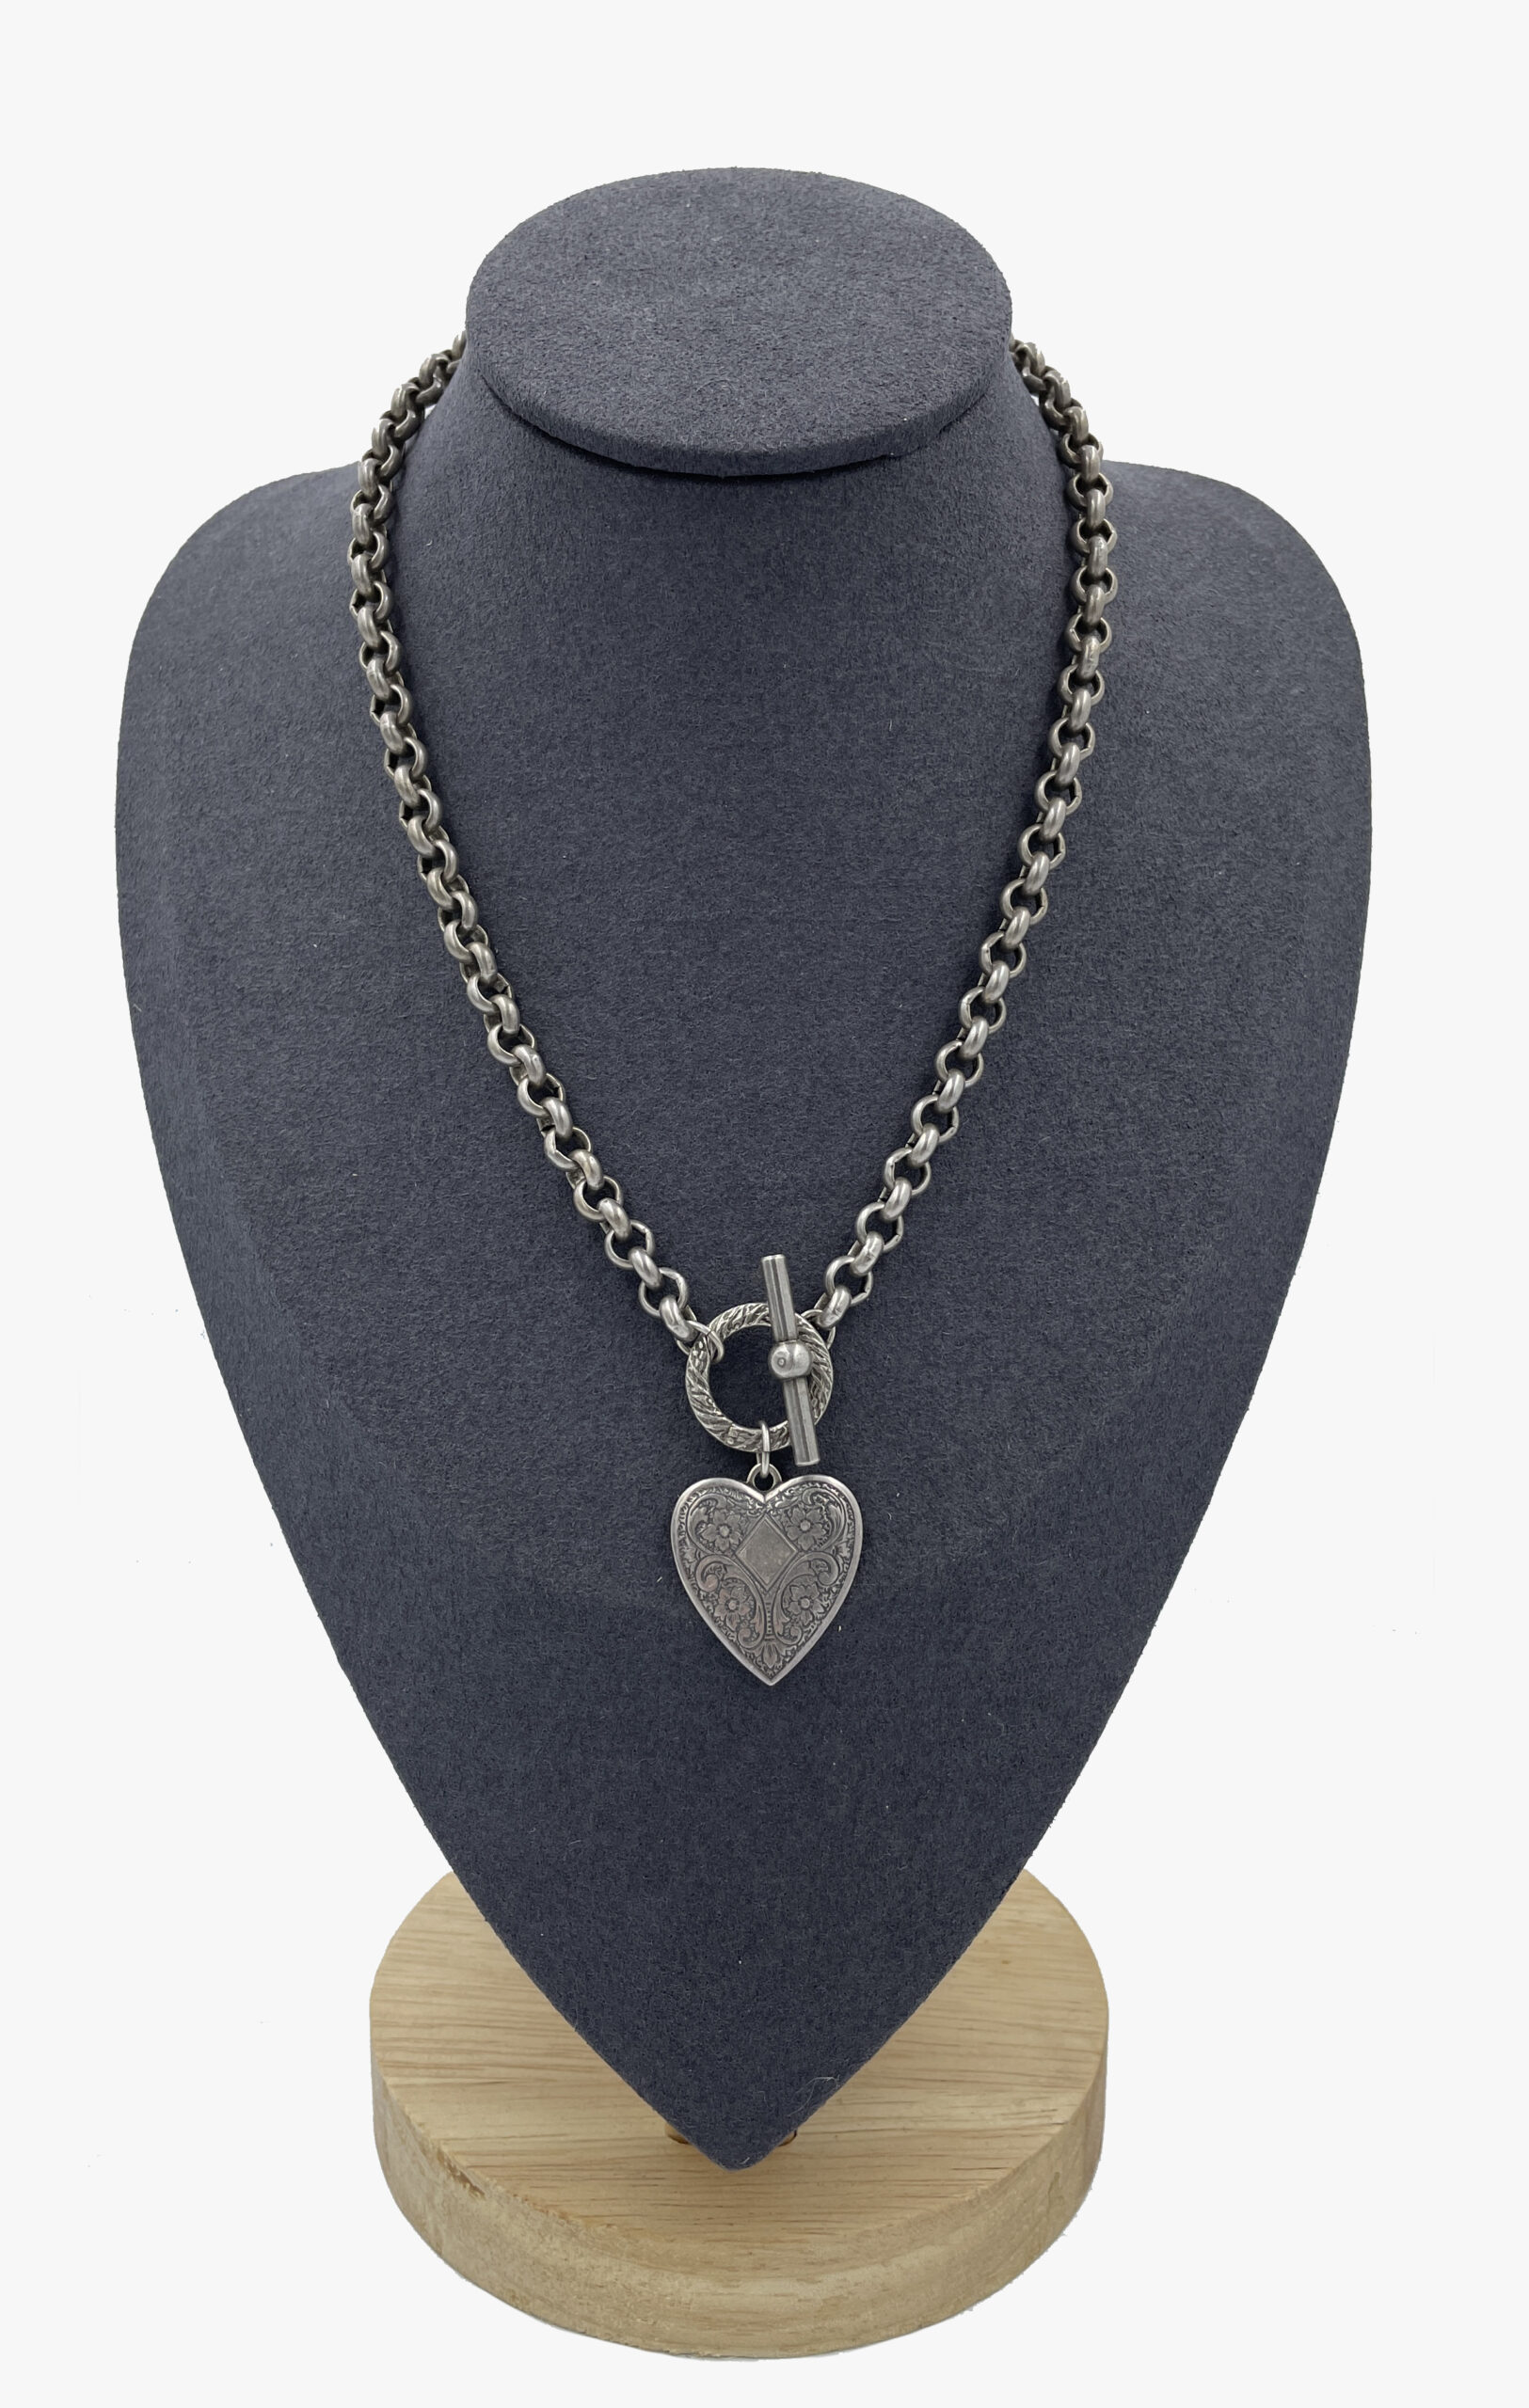 Vintage necklace with heart-shaped pendant-